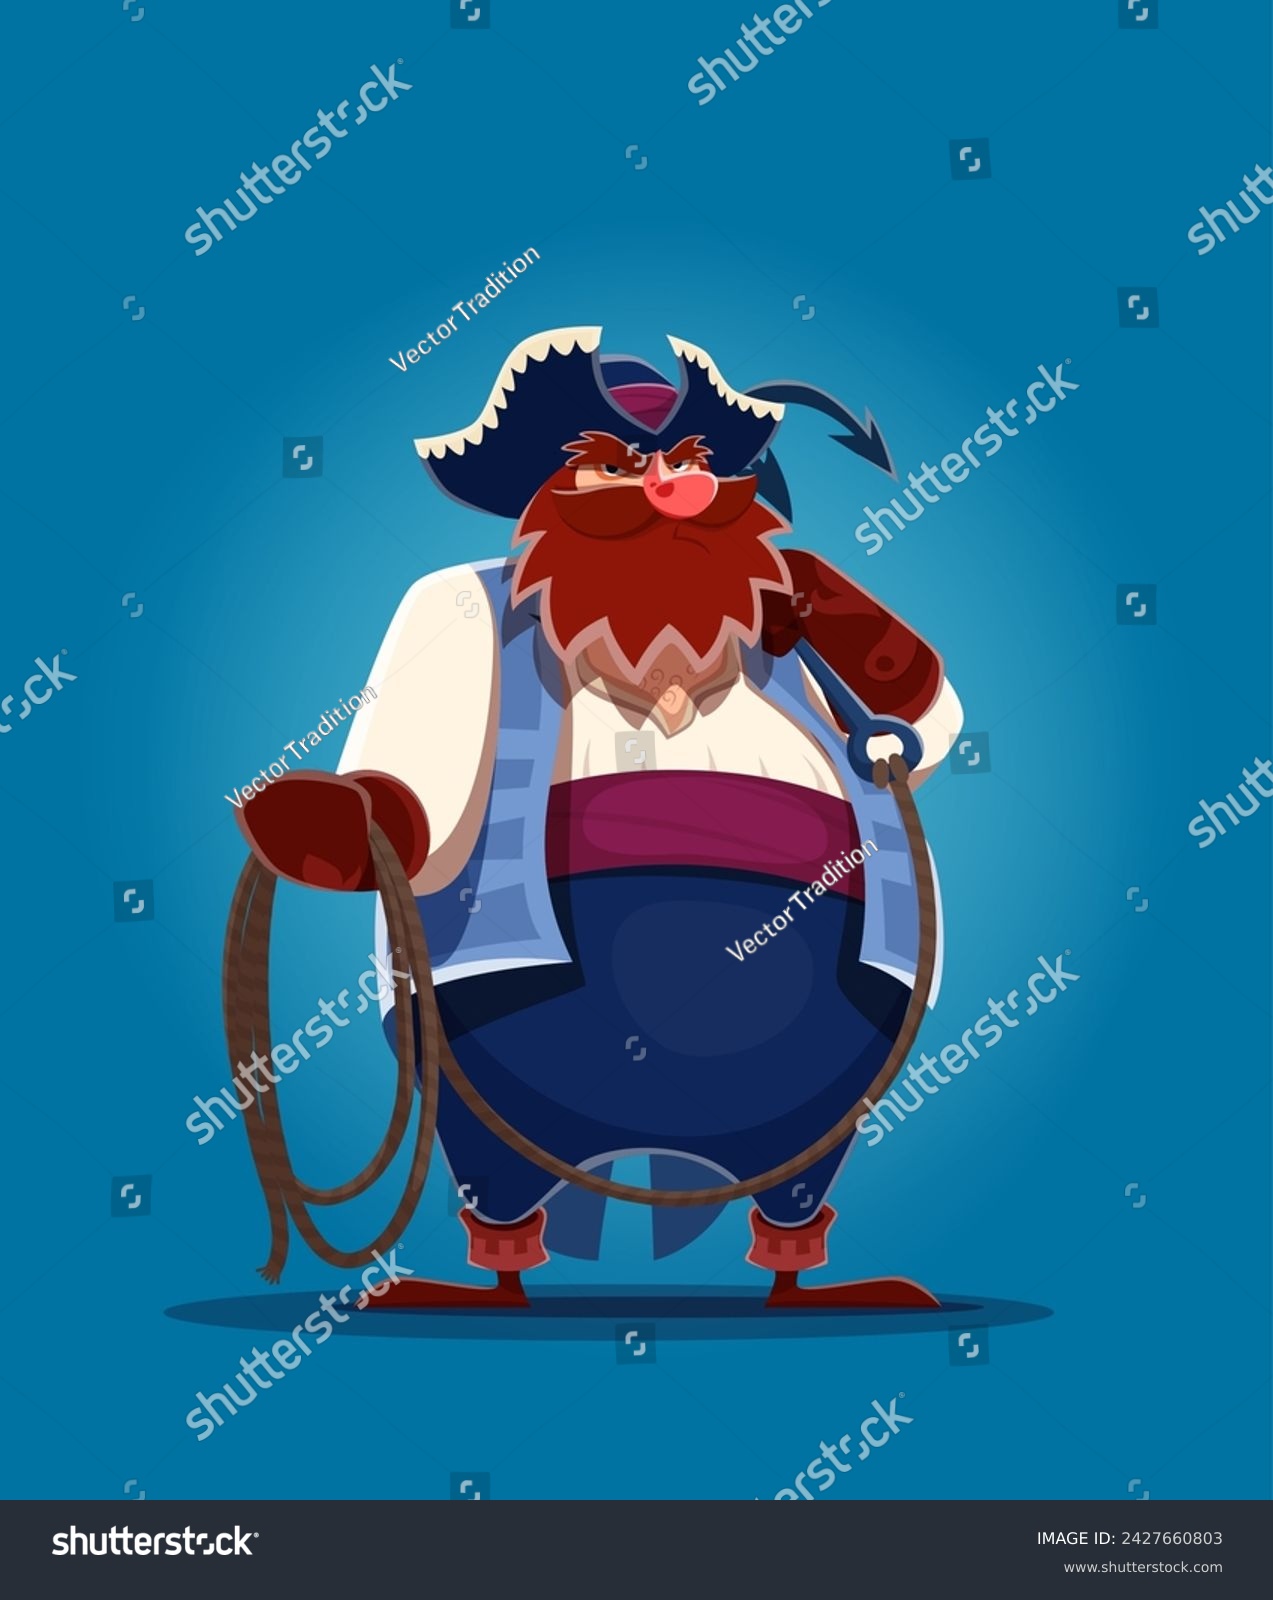 SVG of Cartoon fat pirate, corsair sailor character with grappling hook and rope. Piracy vector personage of funny red bearded pirate or buccaneer with big belly in sea robber costume and tricorn hat svg